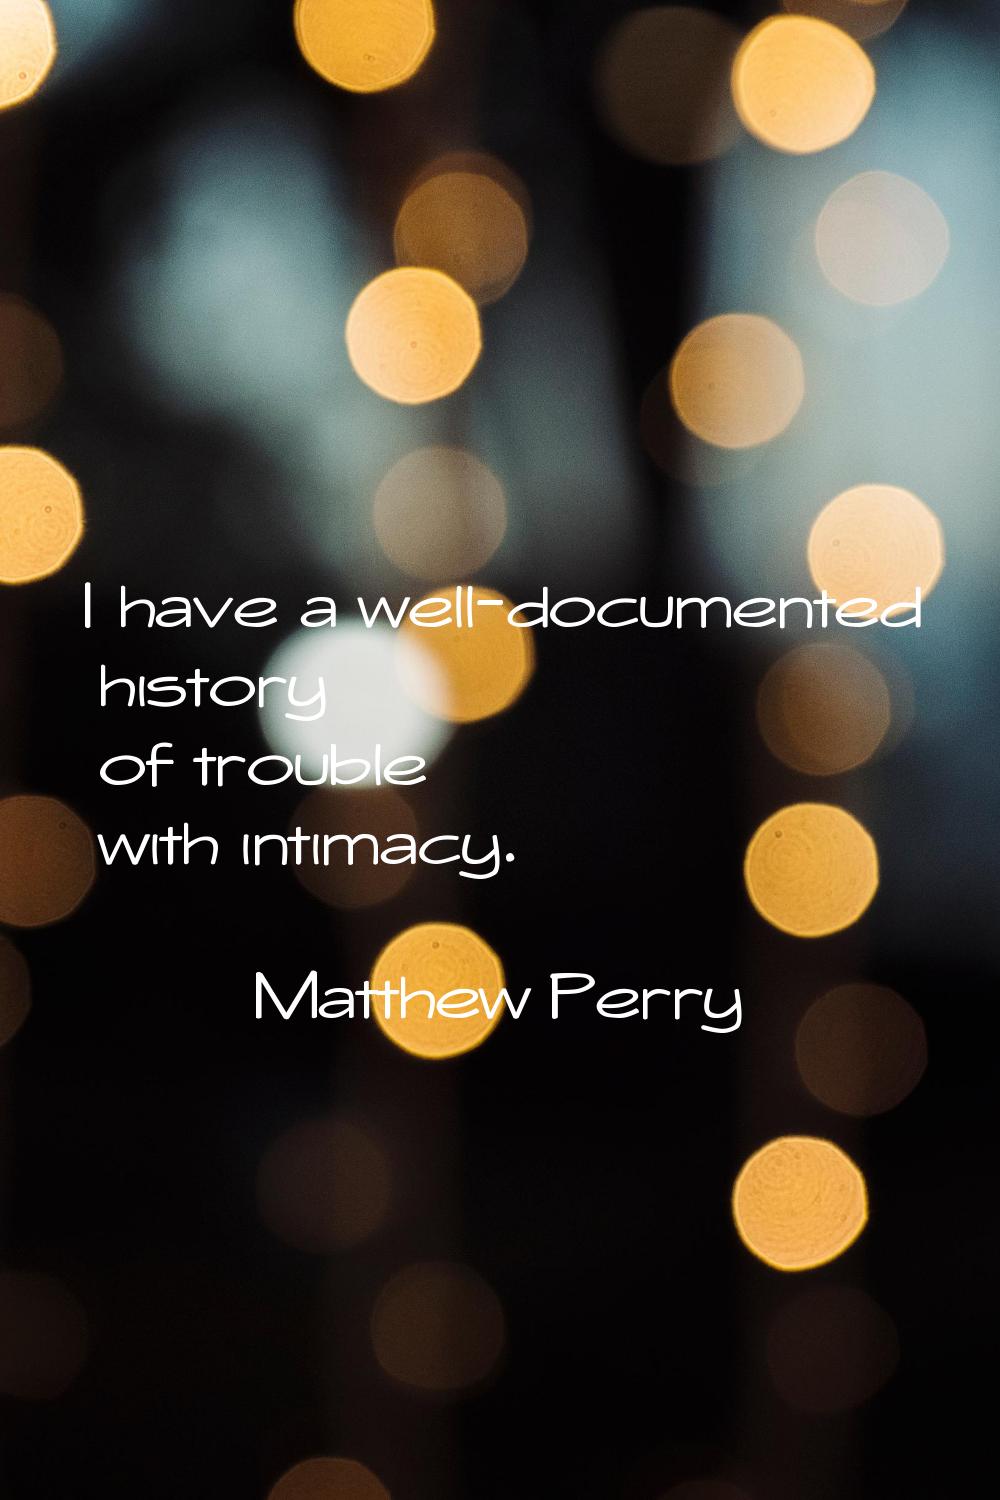 I have a well-documented history of trouble with intimacy.